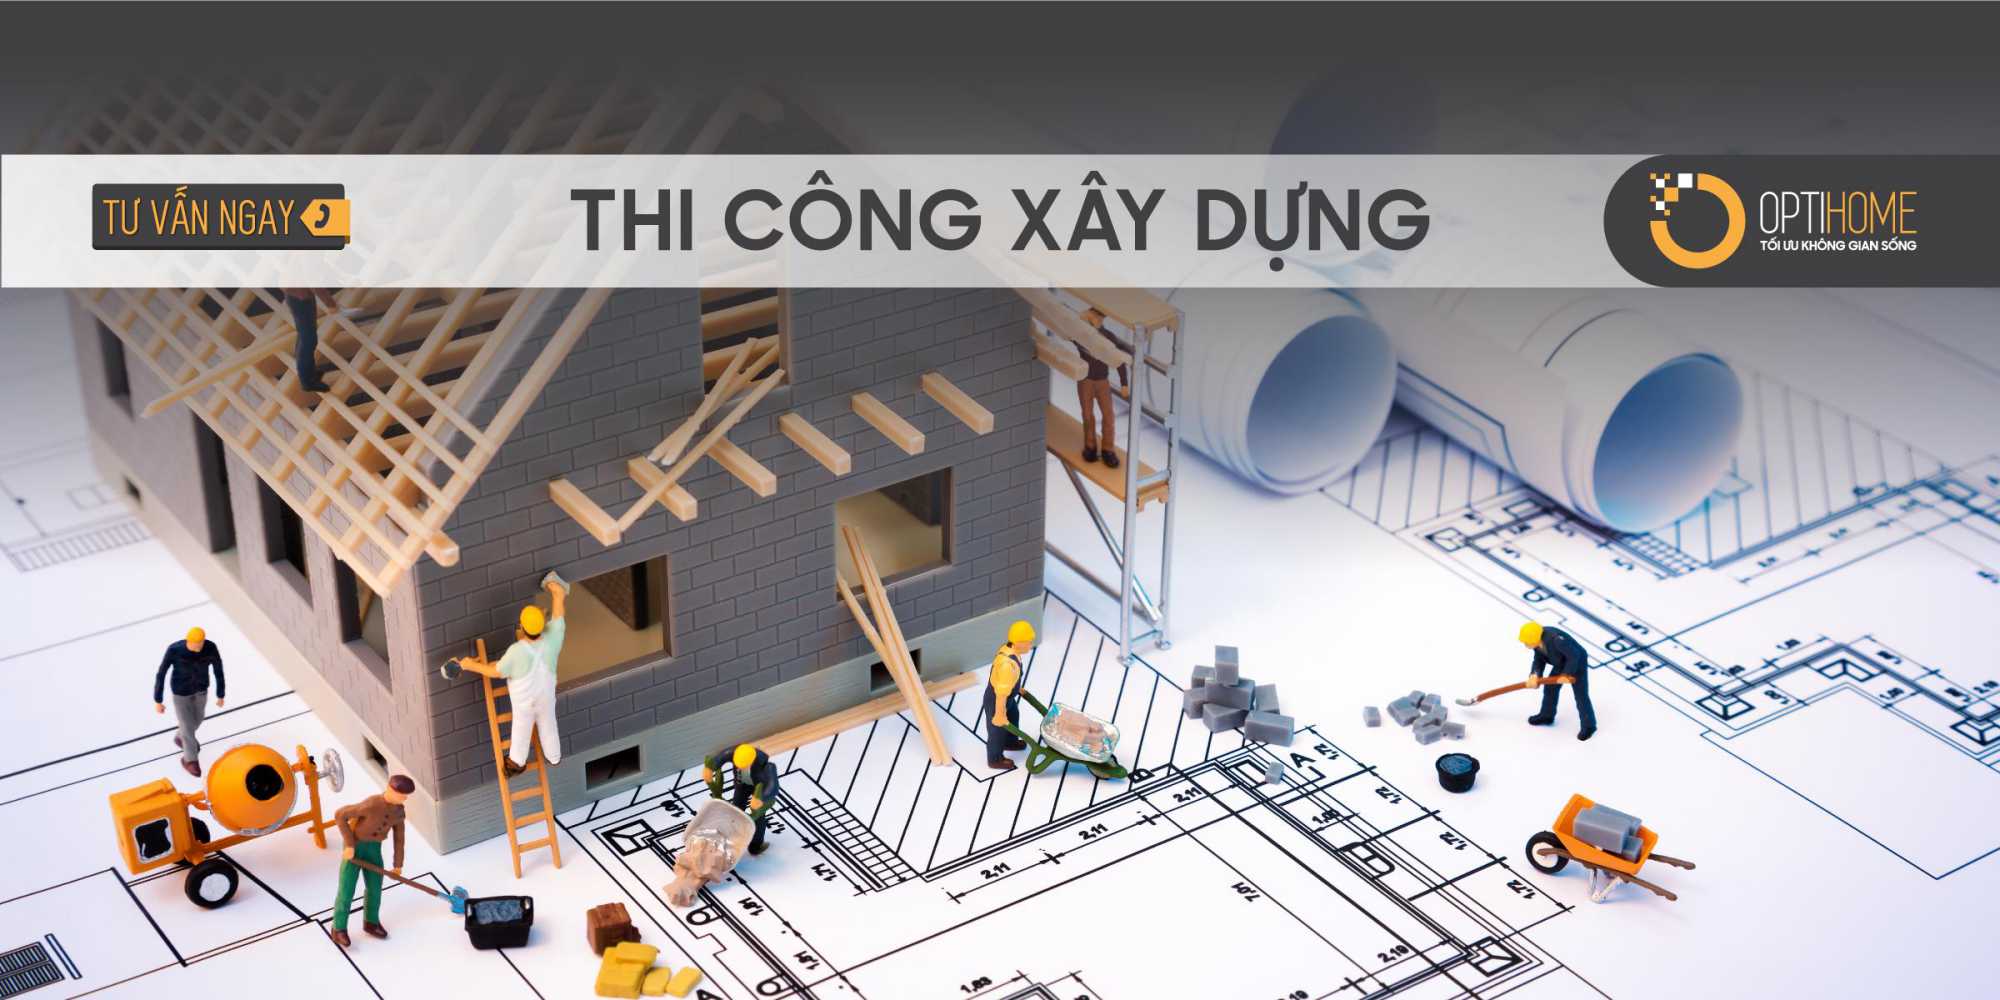 https://optihome.vn/pages/thi-cong-xay-dung